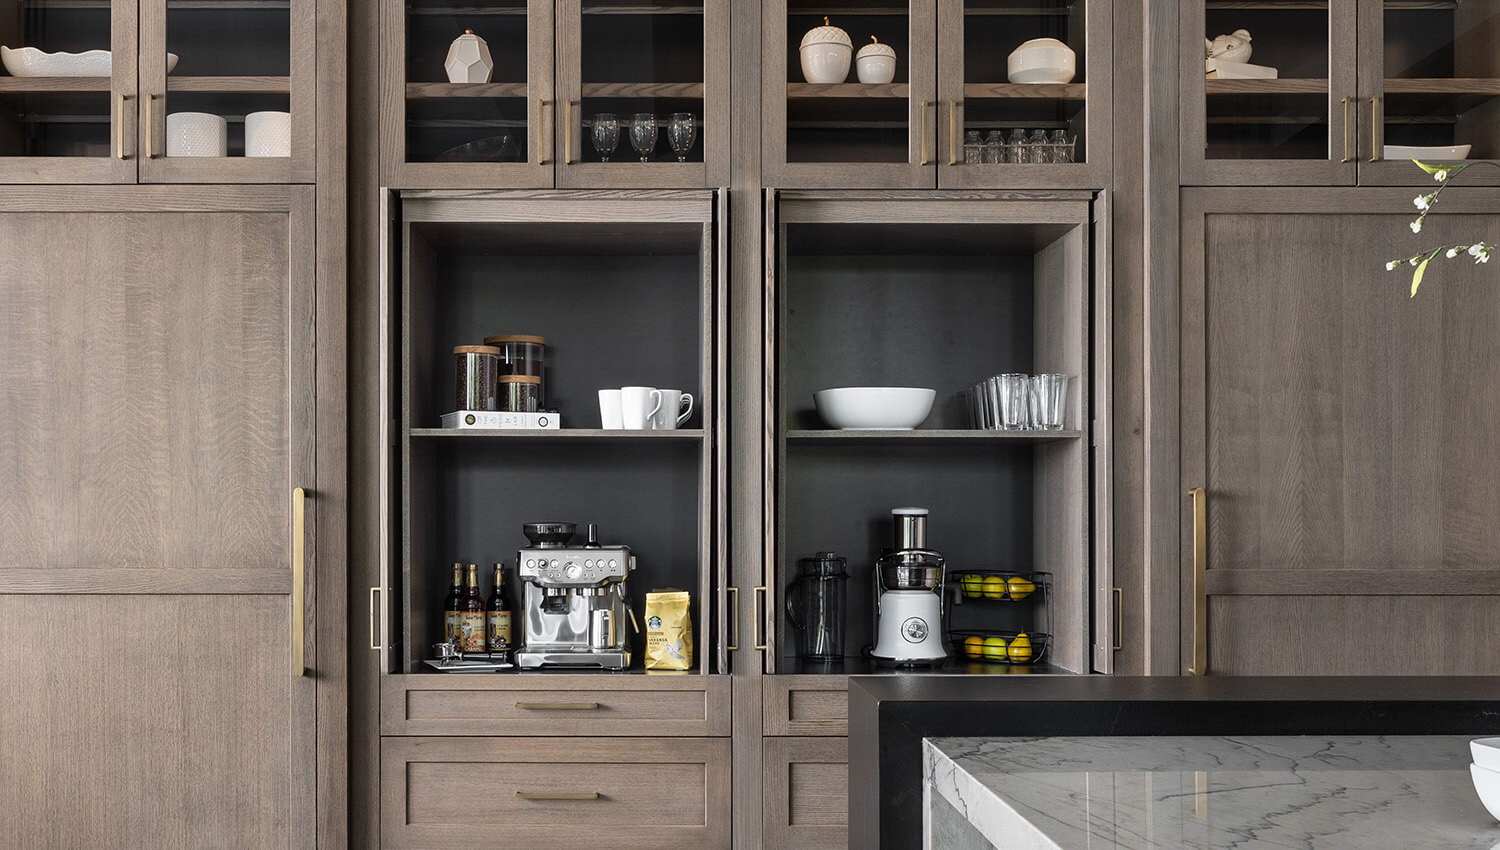 Larder Cabinets: From the History Books to the Newest Kitchen Design ...